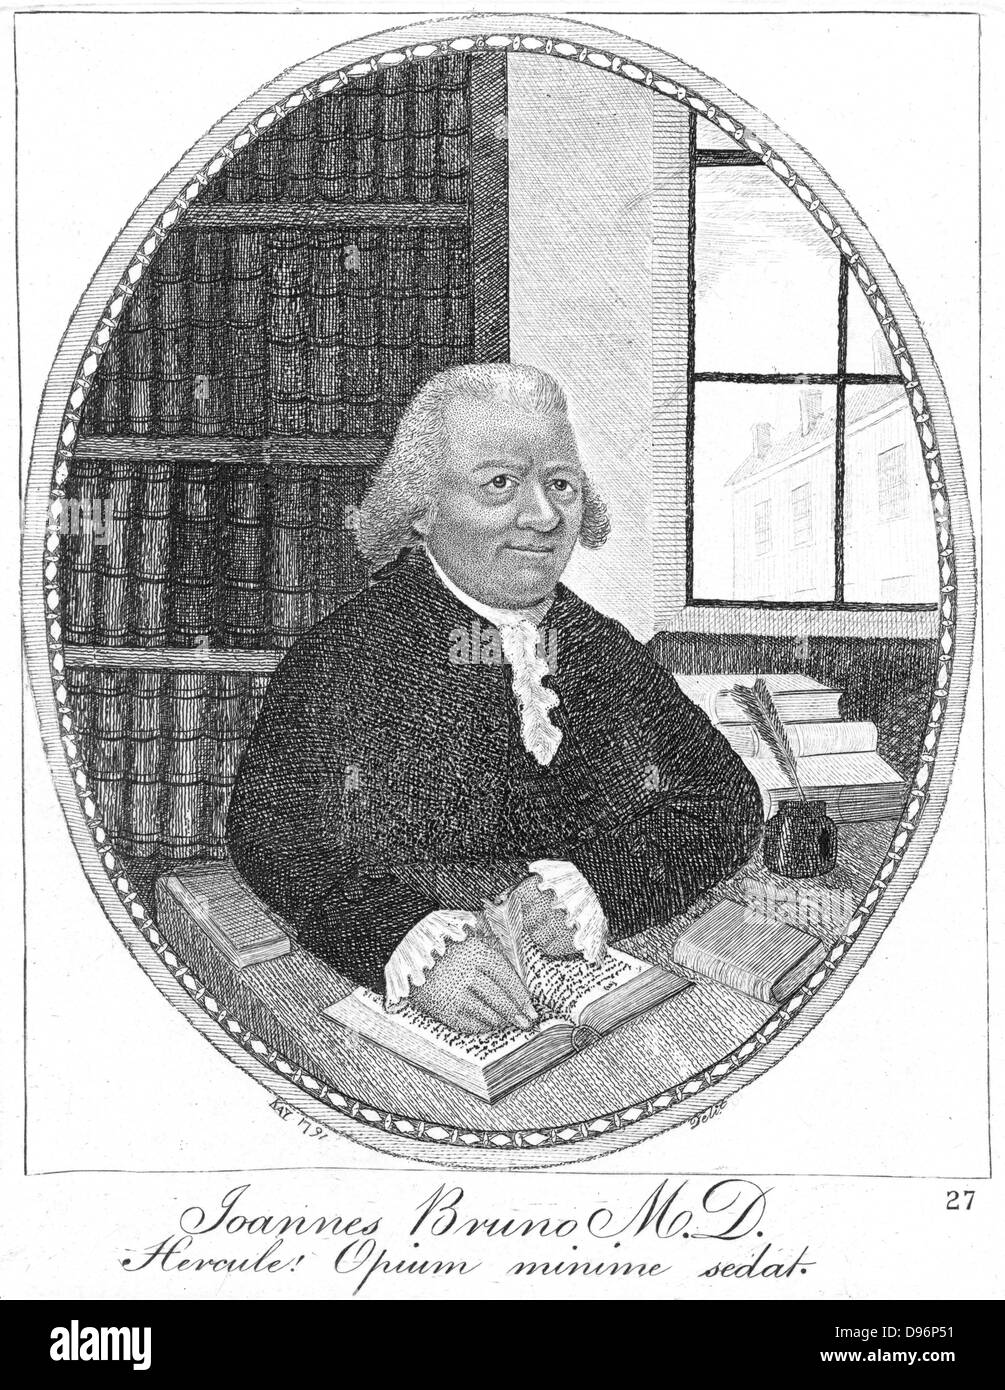 John Brown (1735-88) Scottish physician, 1791.  He proposed the Brunonian system of medicine which had two classes of disease 1: sthenic (resulting from excess) 2: asthenic (resulting from deficiency). Brown disapproved of blood-letting. Etching of 1791 by John Kay (1742-1826). Stock Photo